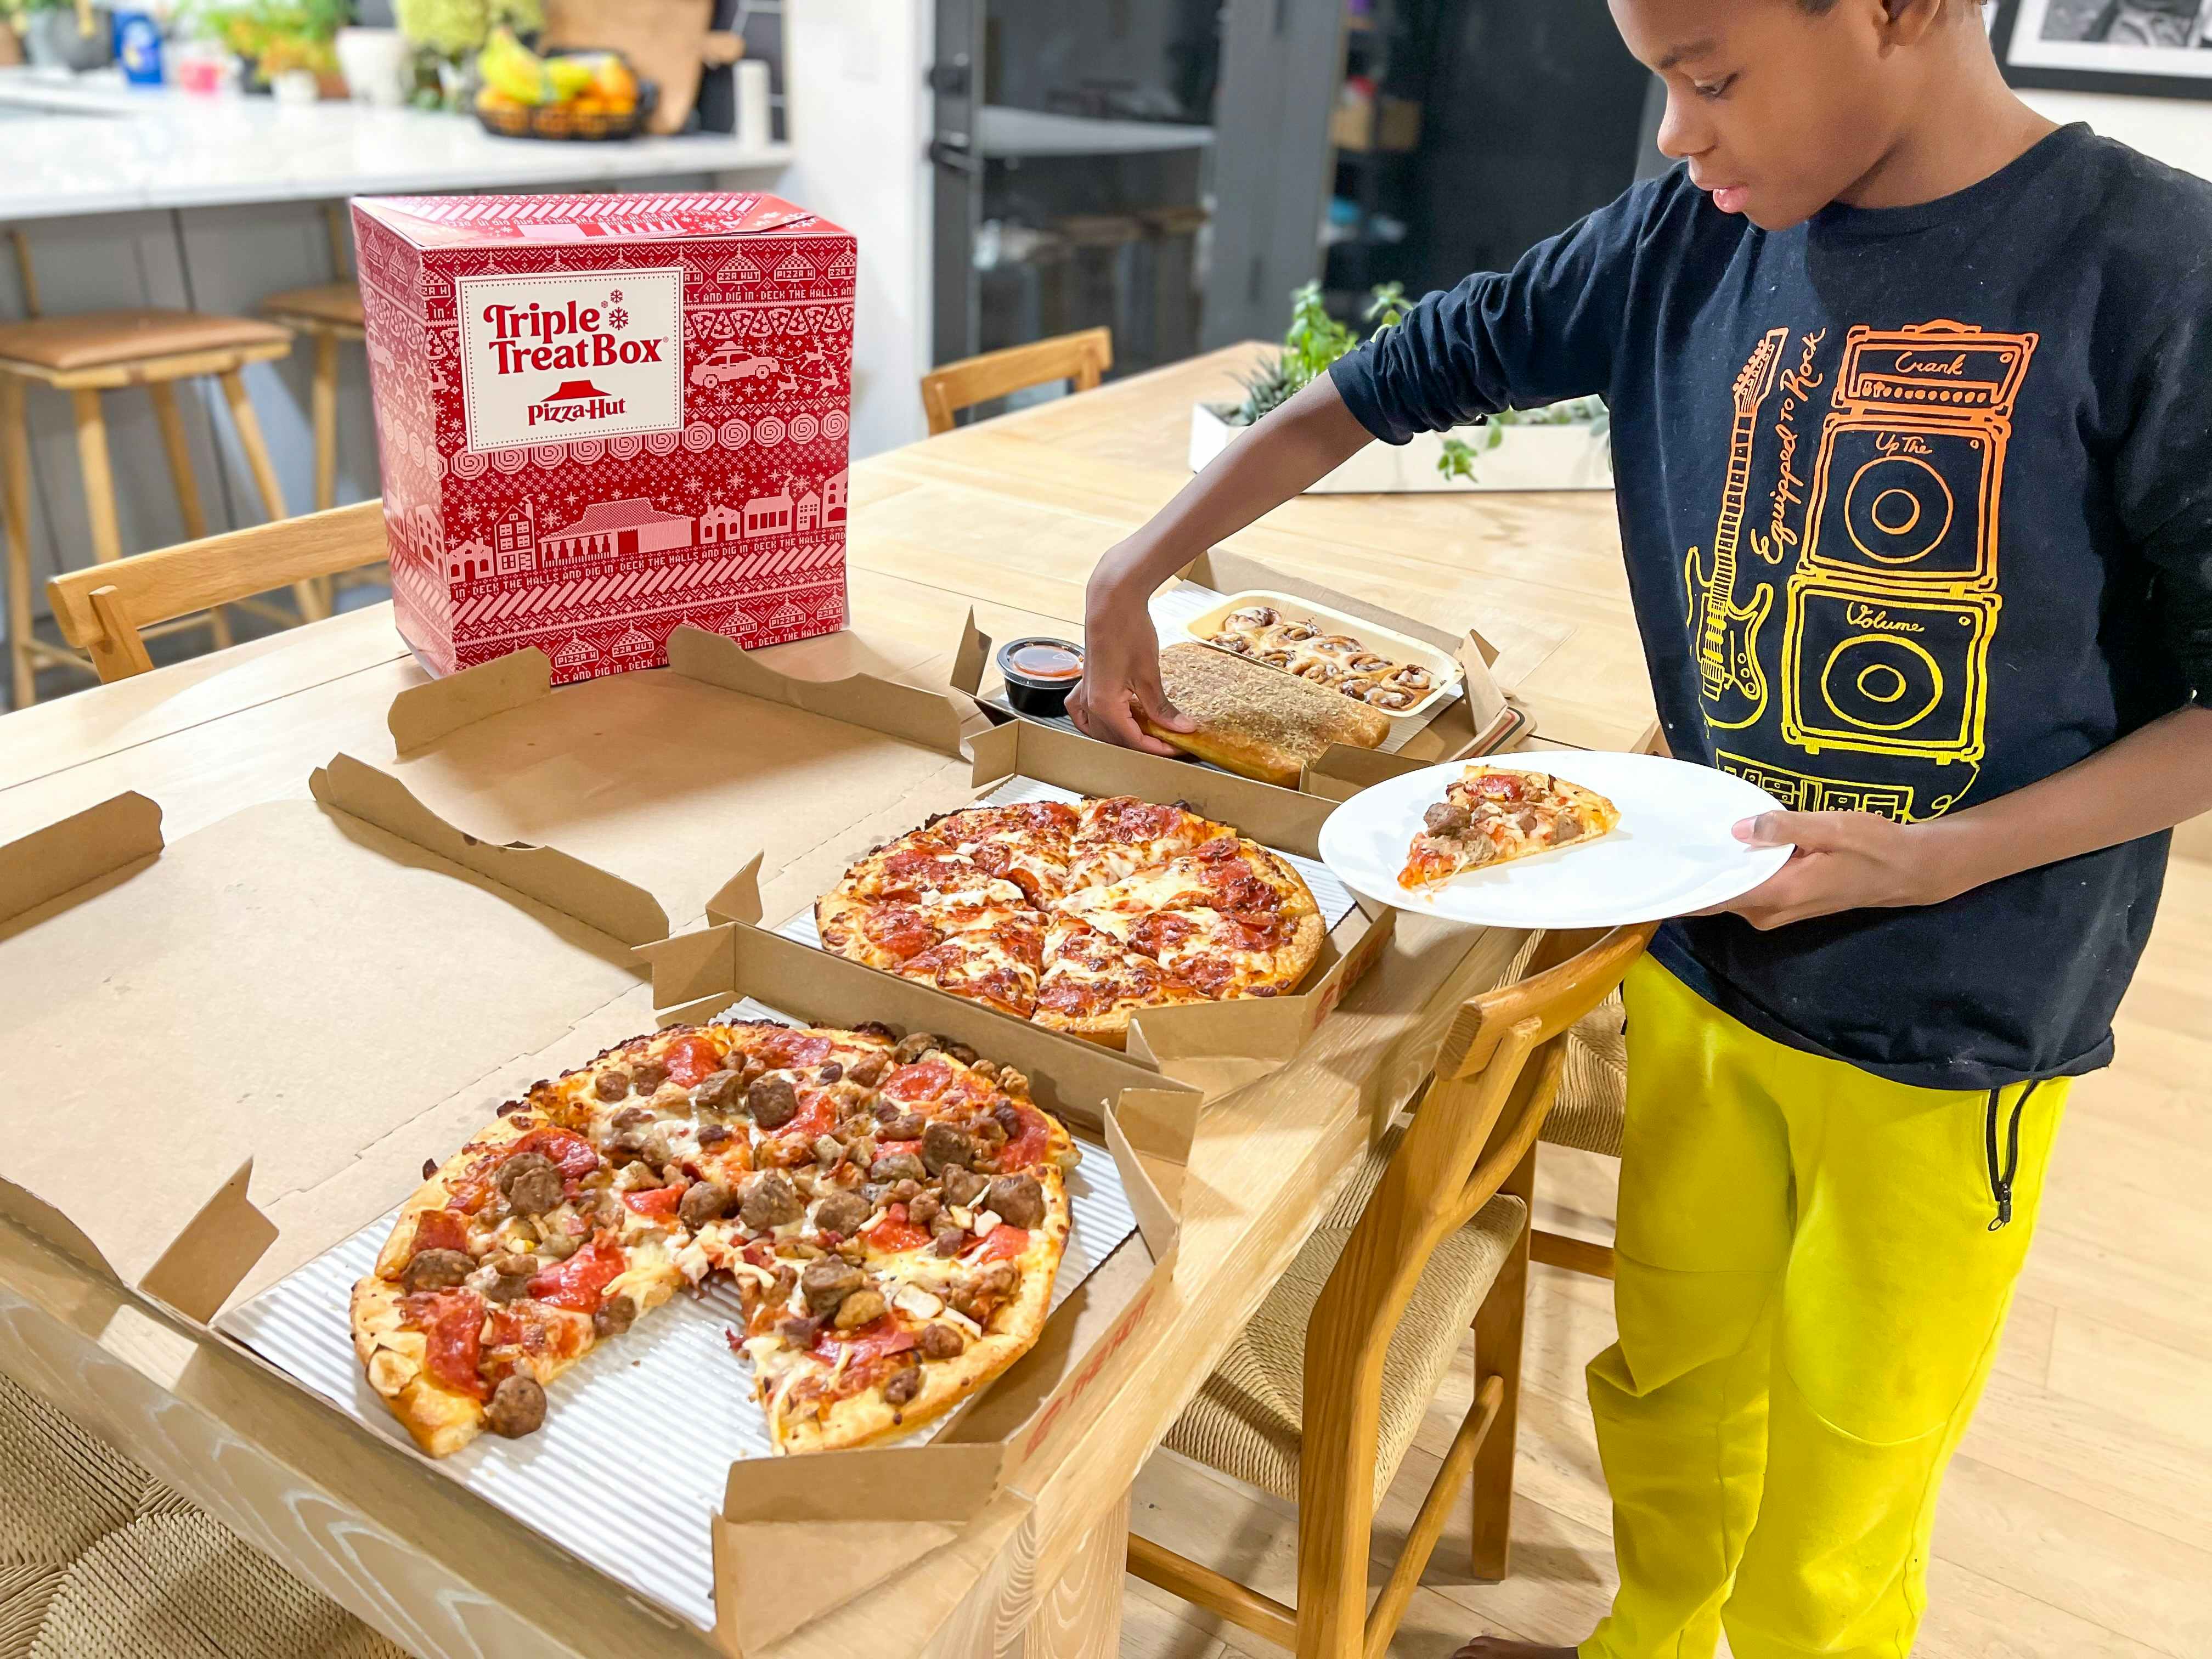 A young boy taking a slice of pizza from a box on a table